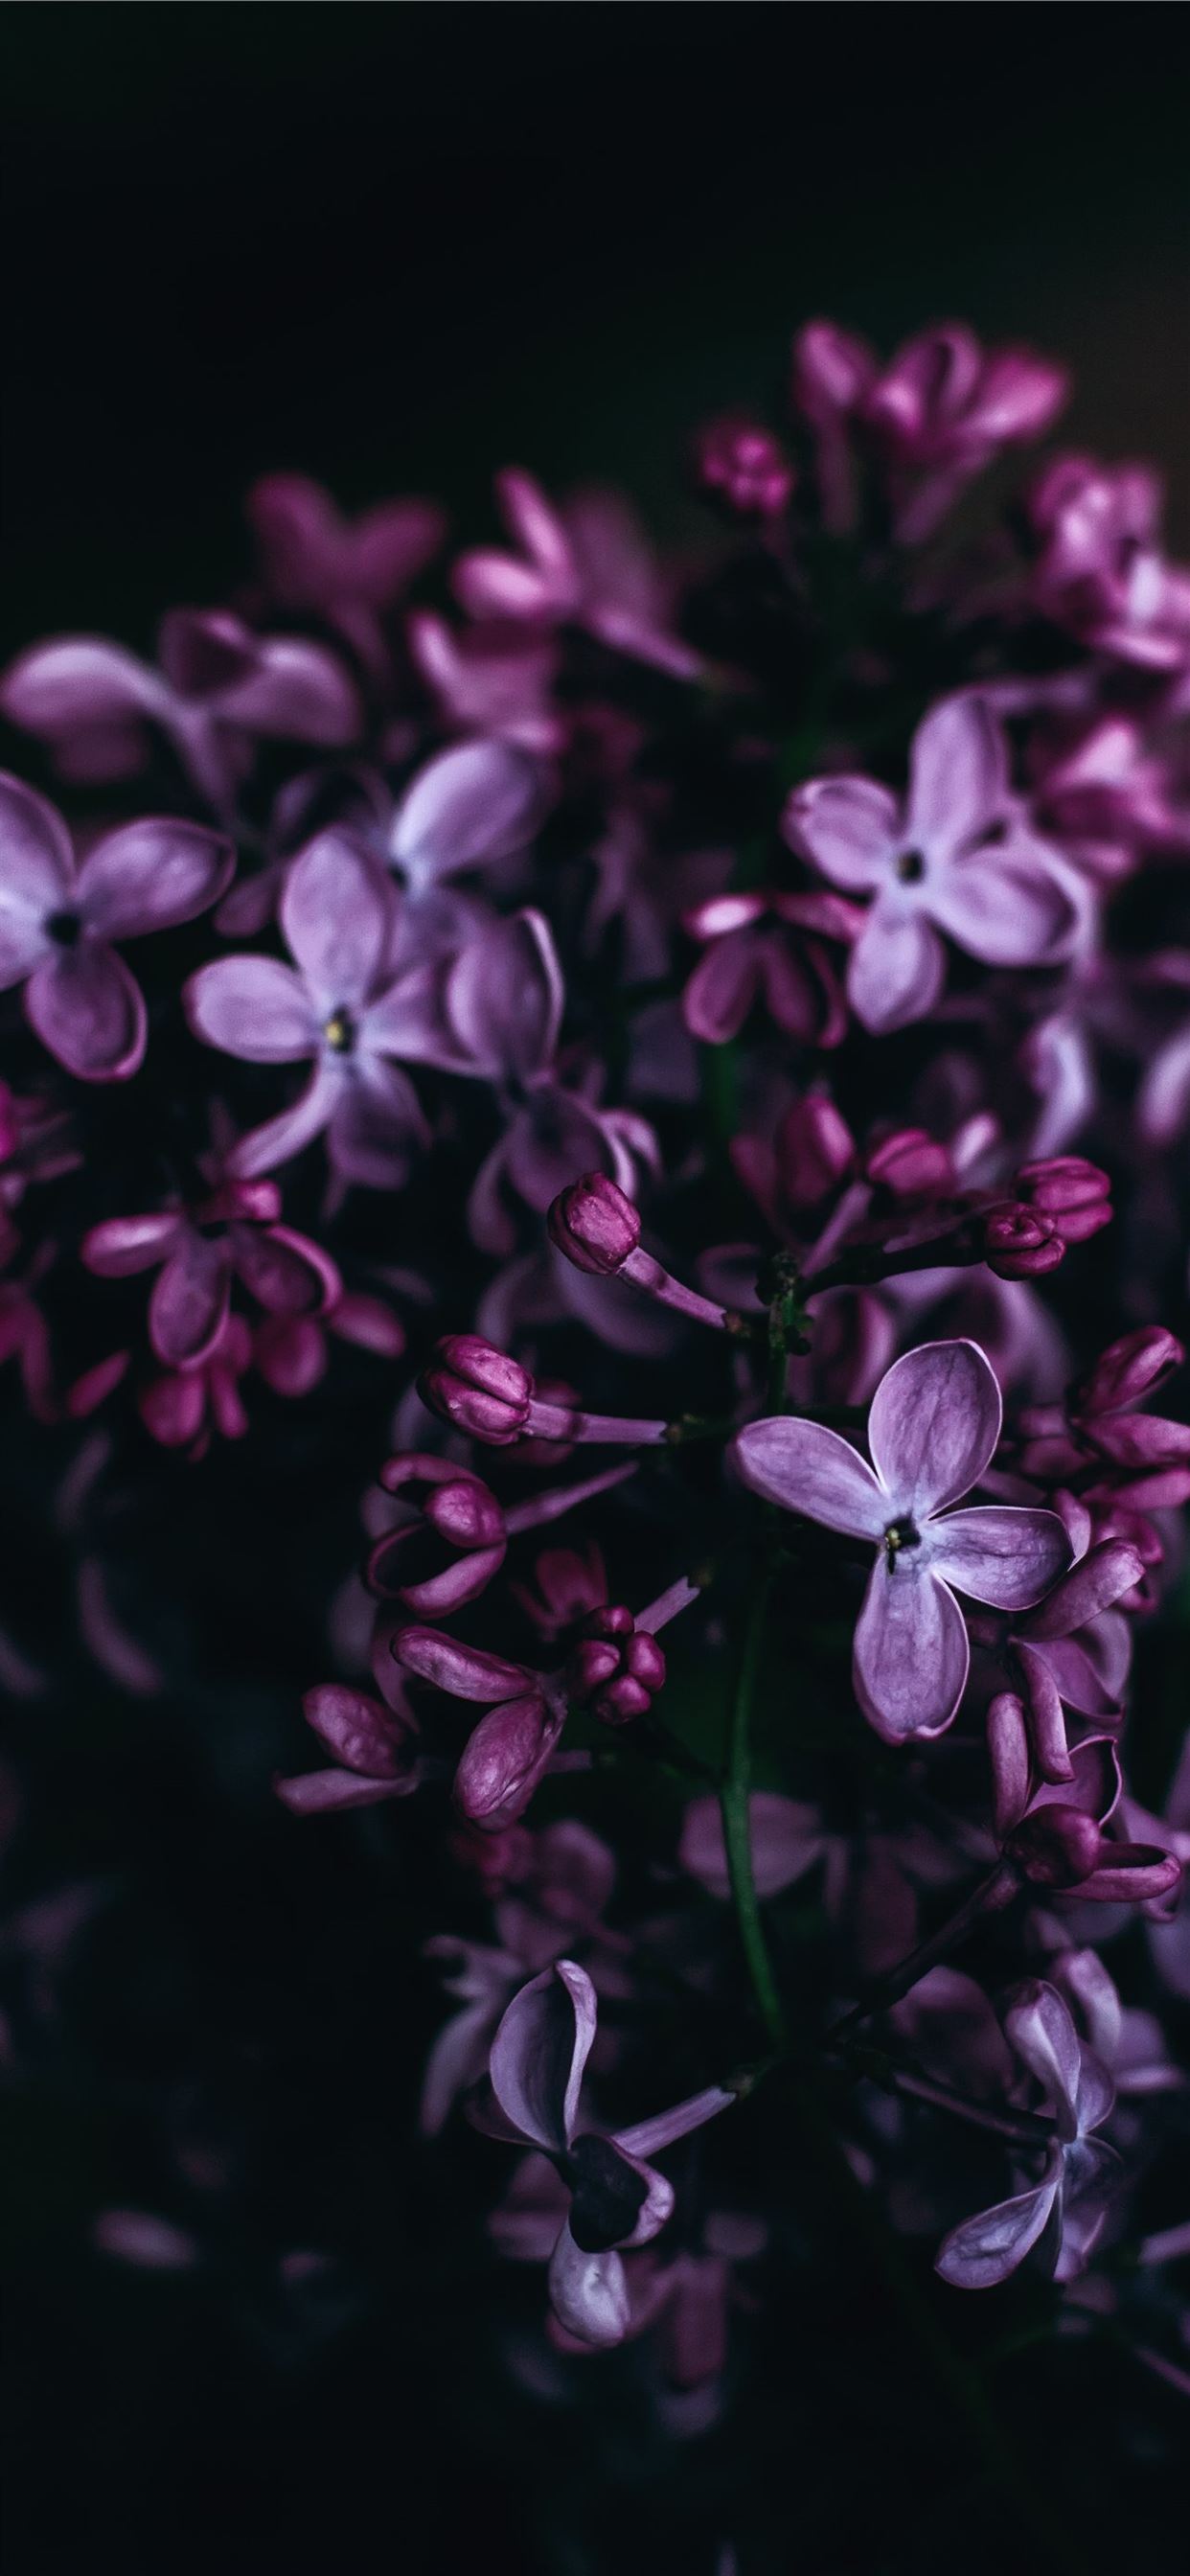 100 Lilac Pictures HD  Download Free Images on Unsplash